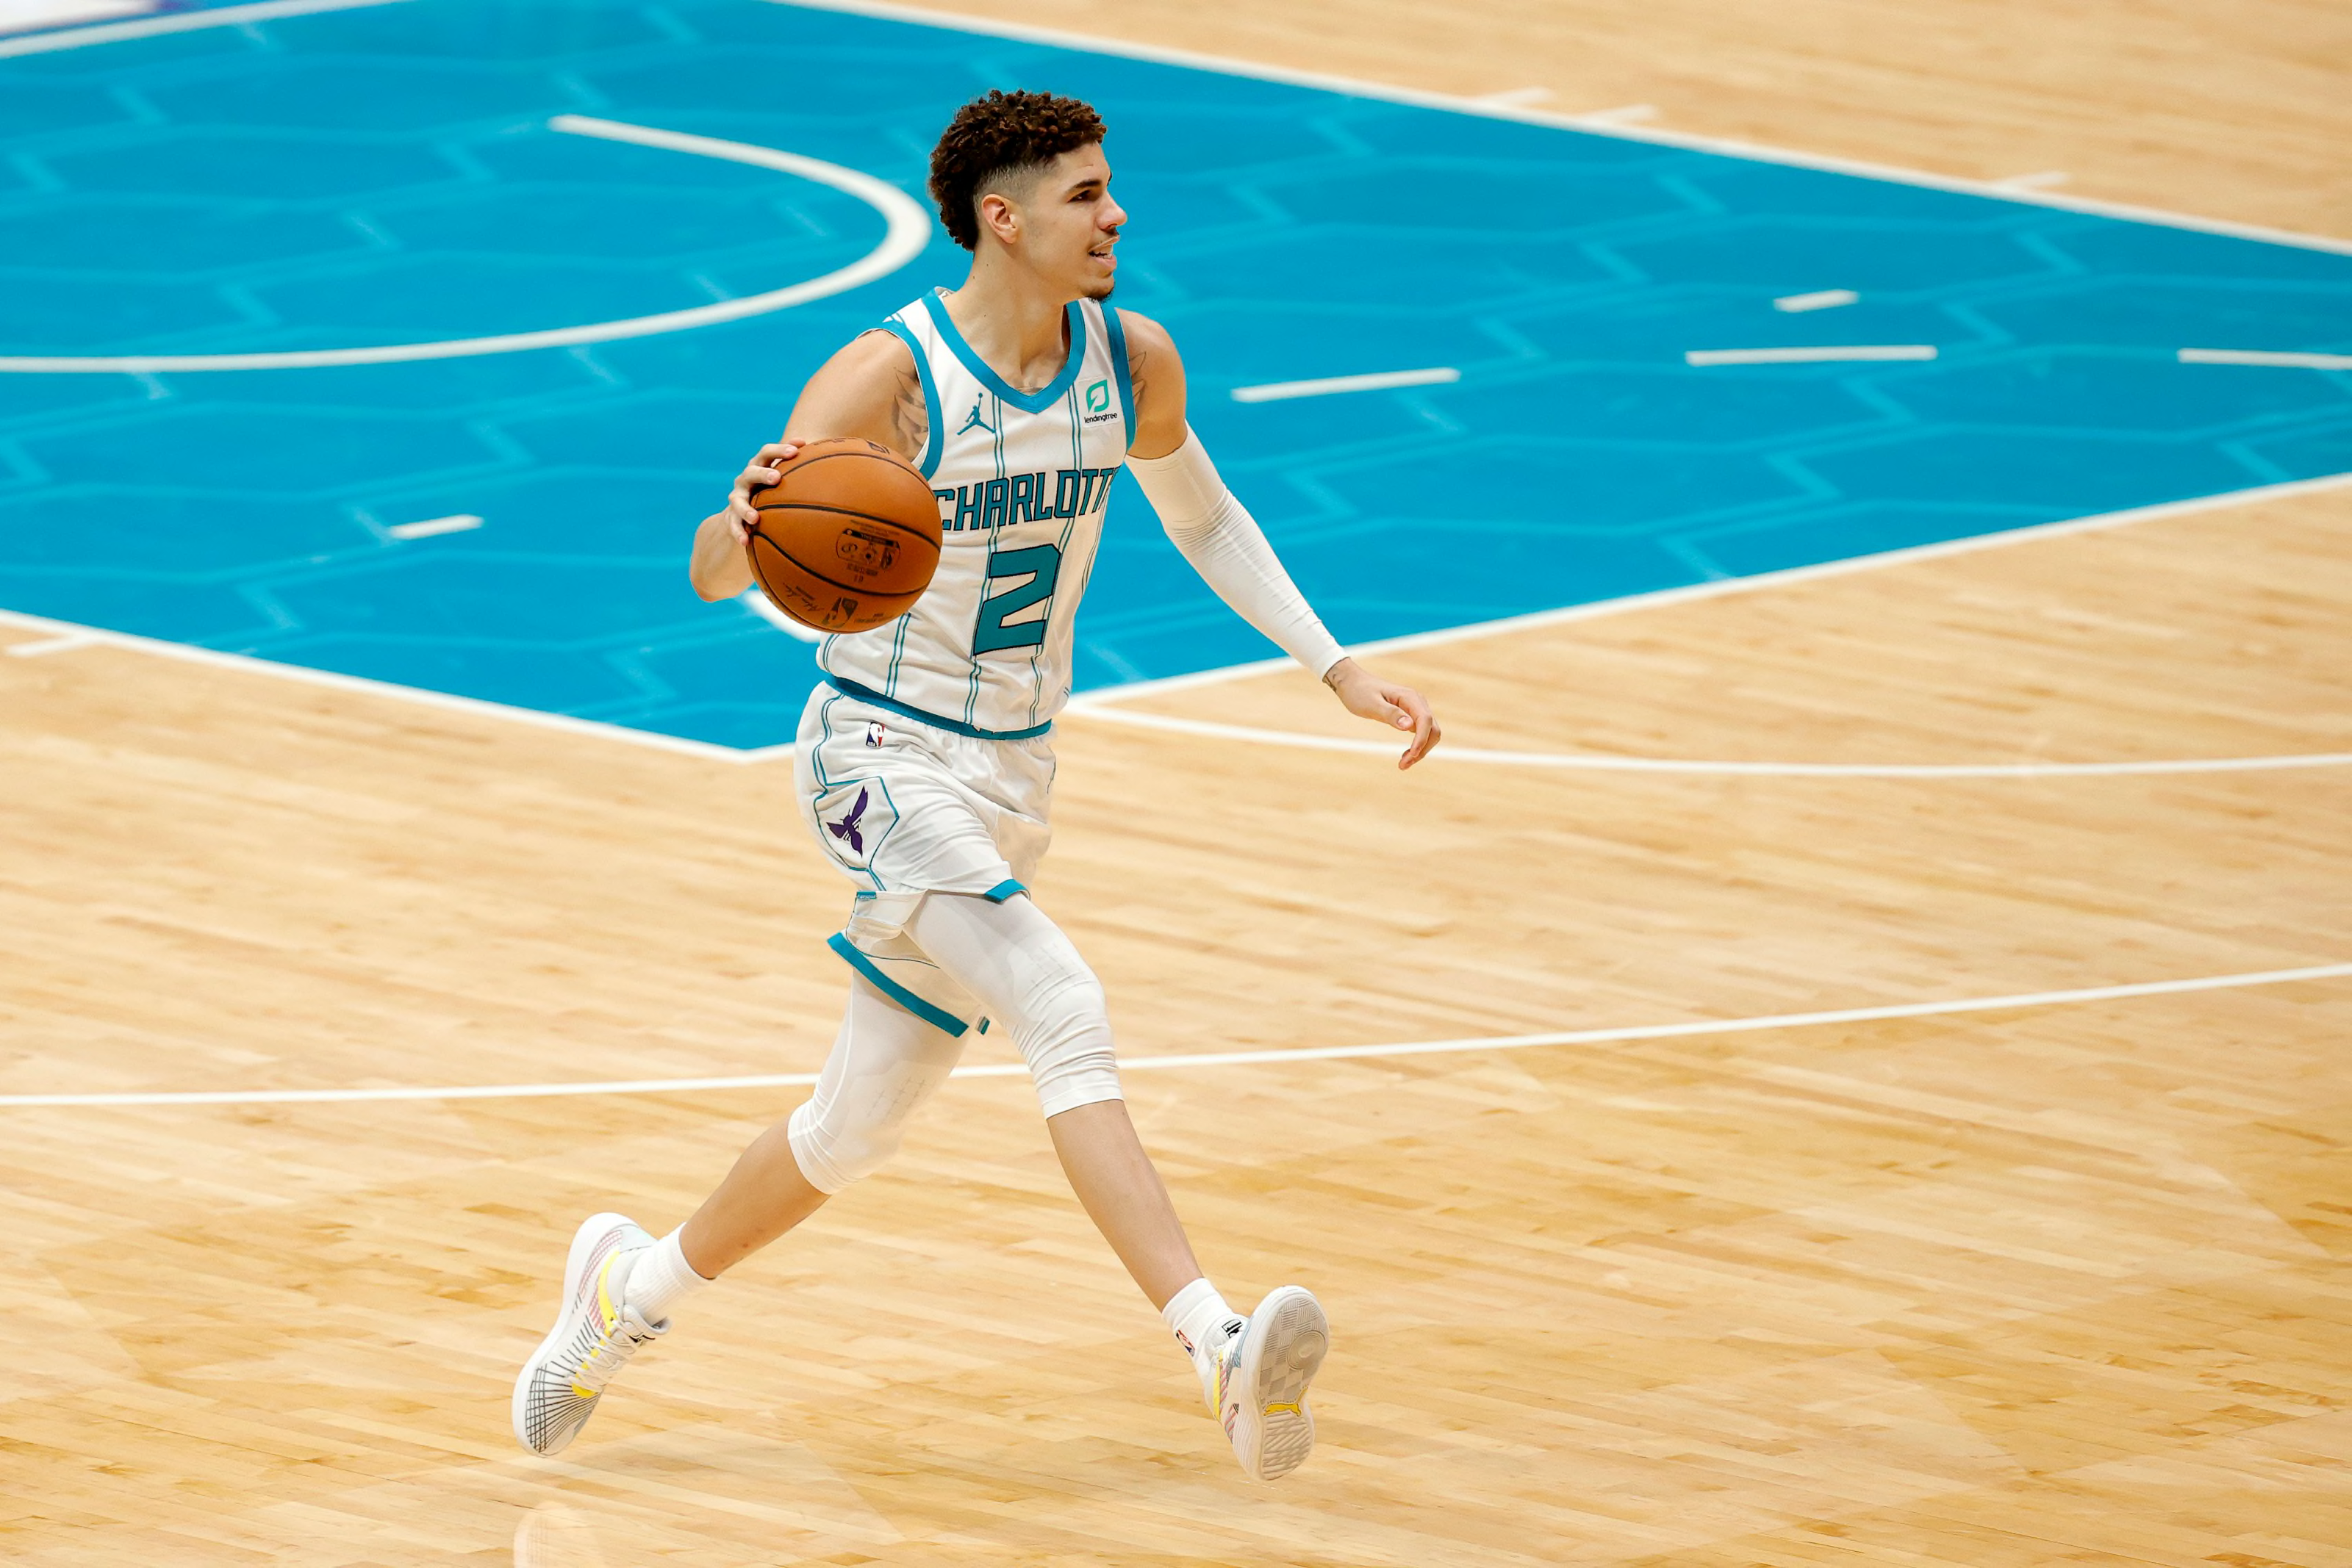 LaMelo Ball Is On His Way To STARDOM  The Charlotte Hornets Future 